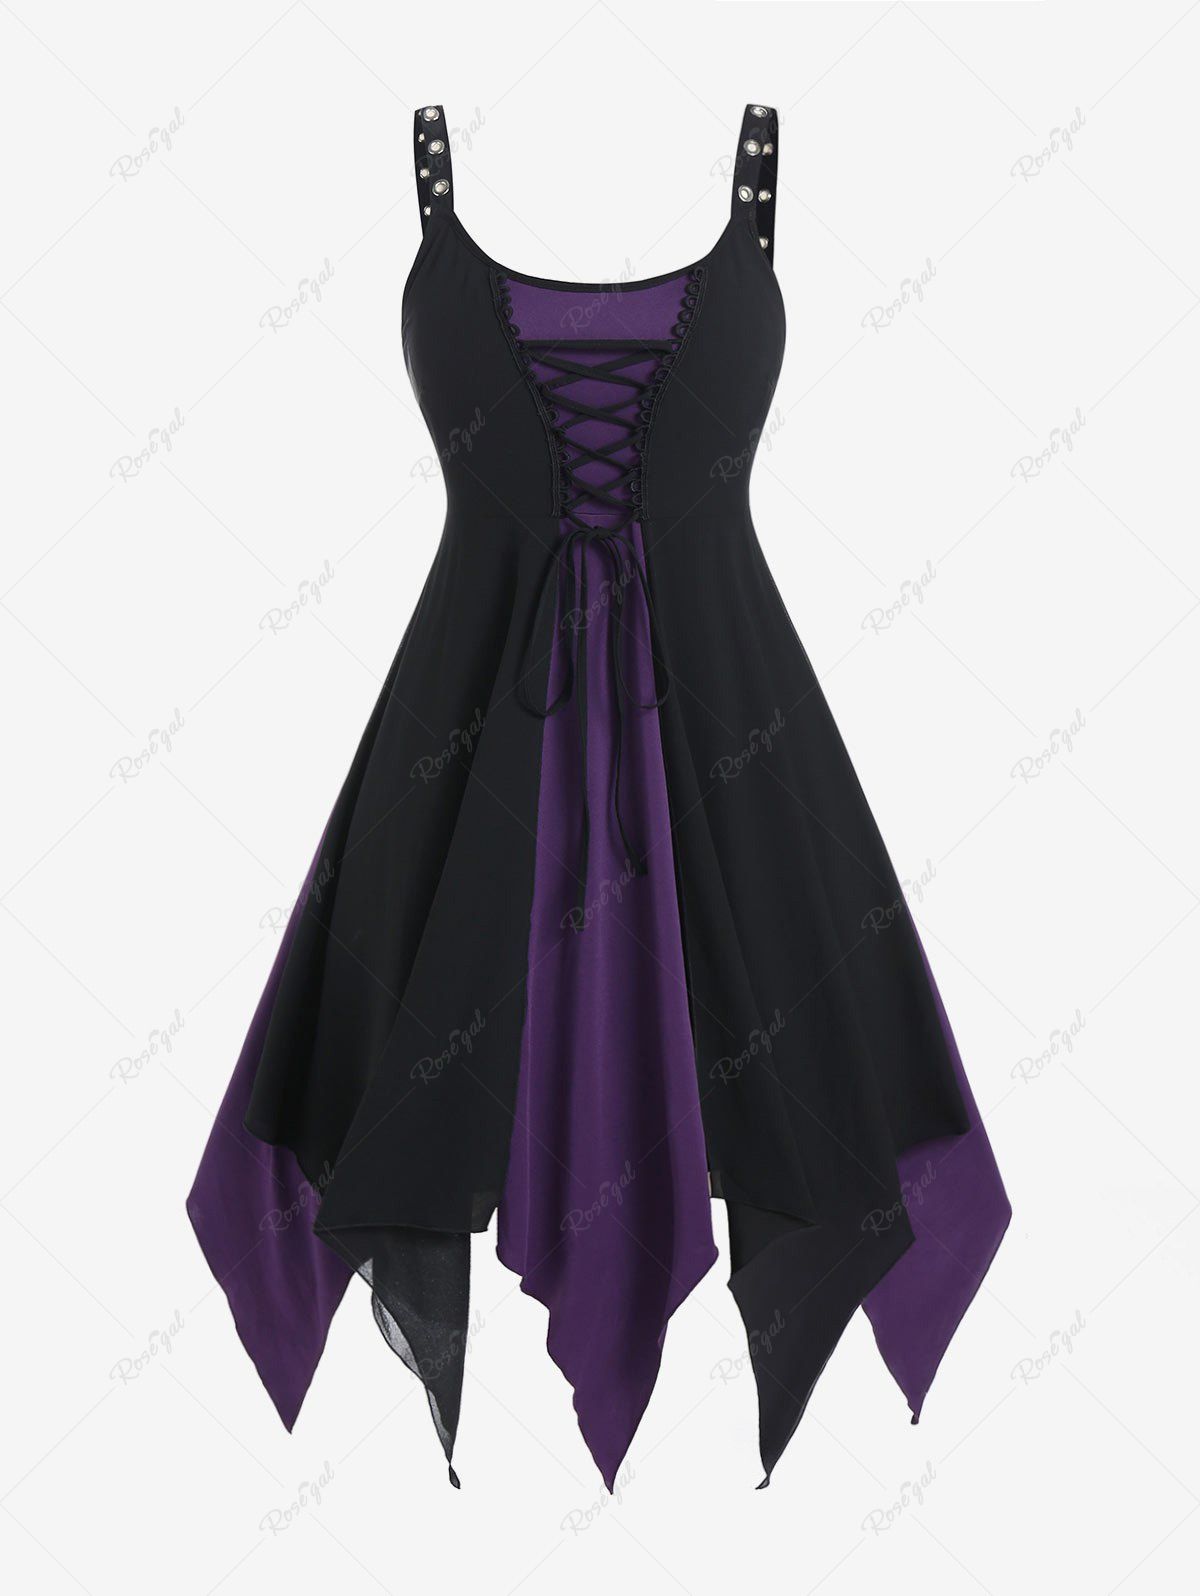 Affordable Plus Size Gothic Lace Up Grommet Backless Sleeveless Handkerchief Midi Dress  